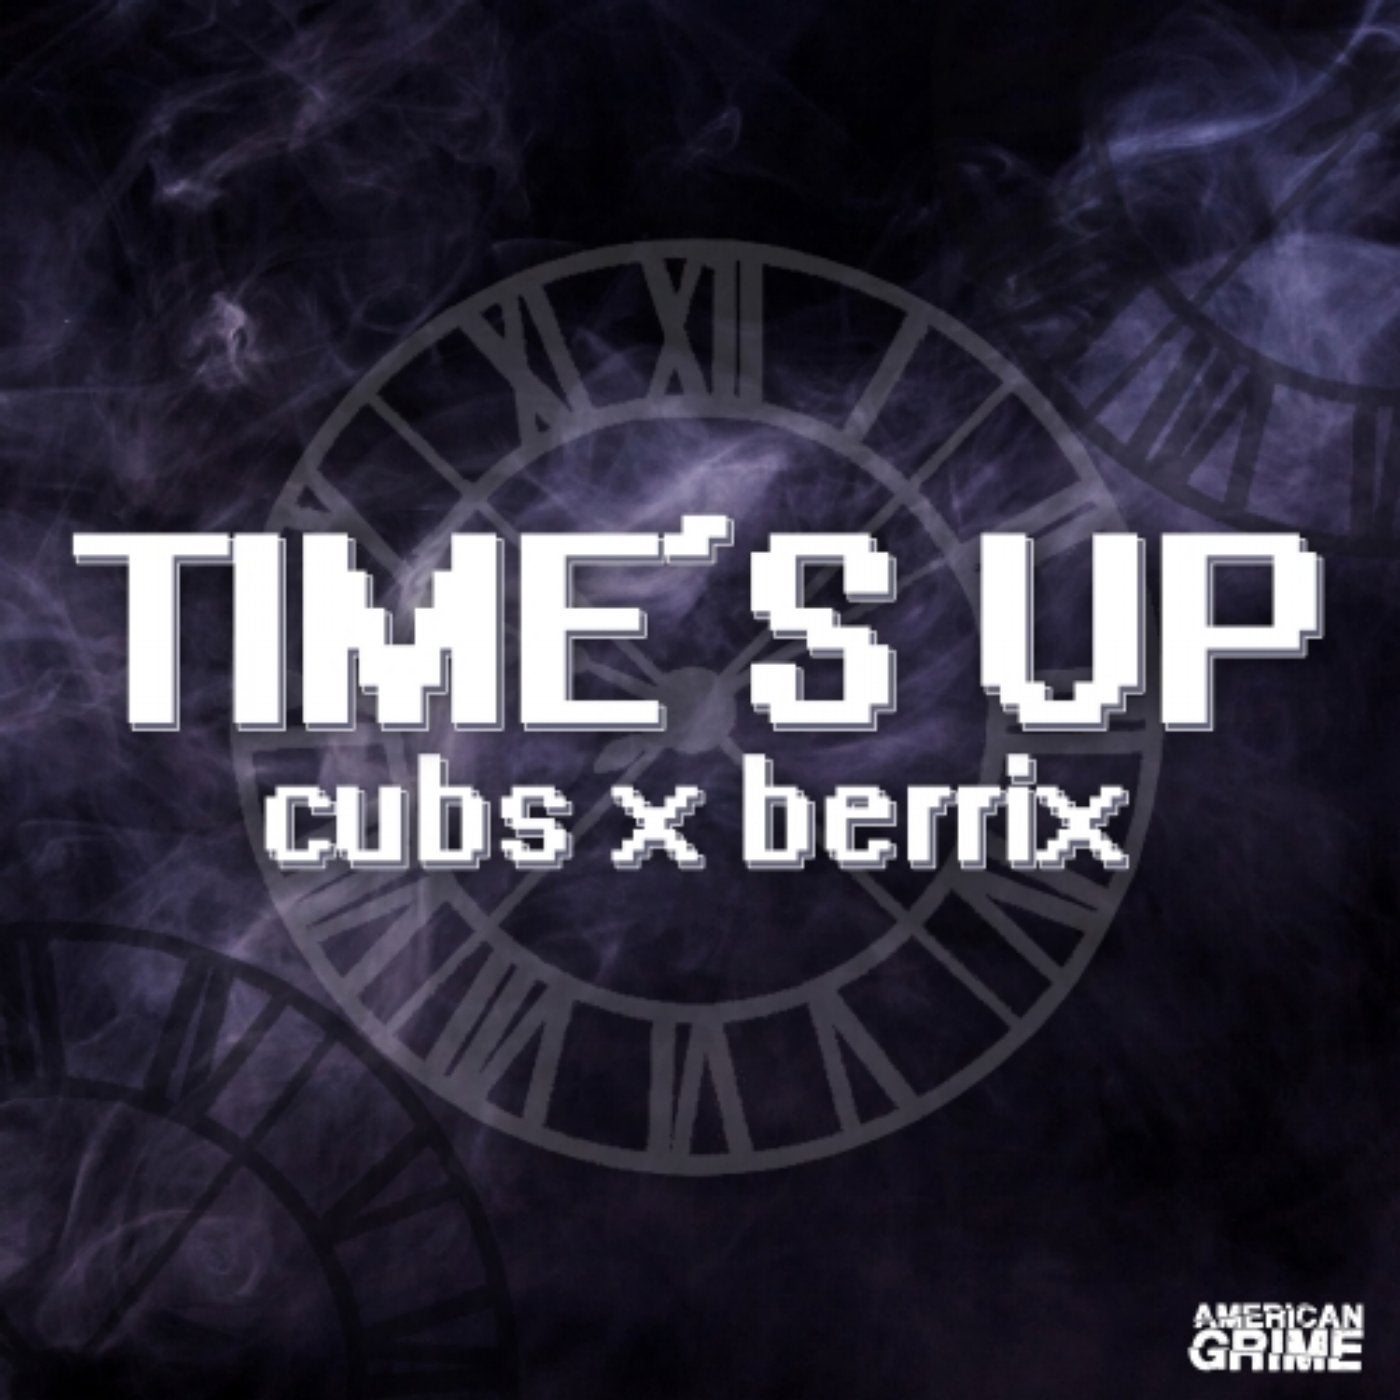 Time's Up EP